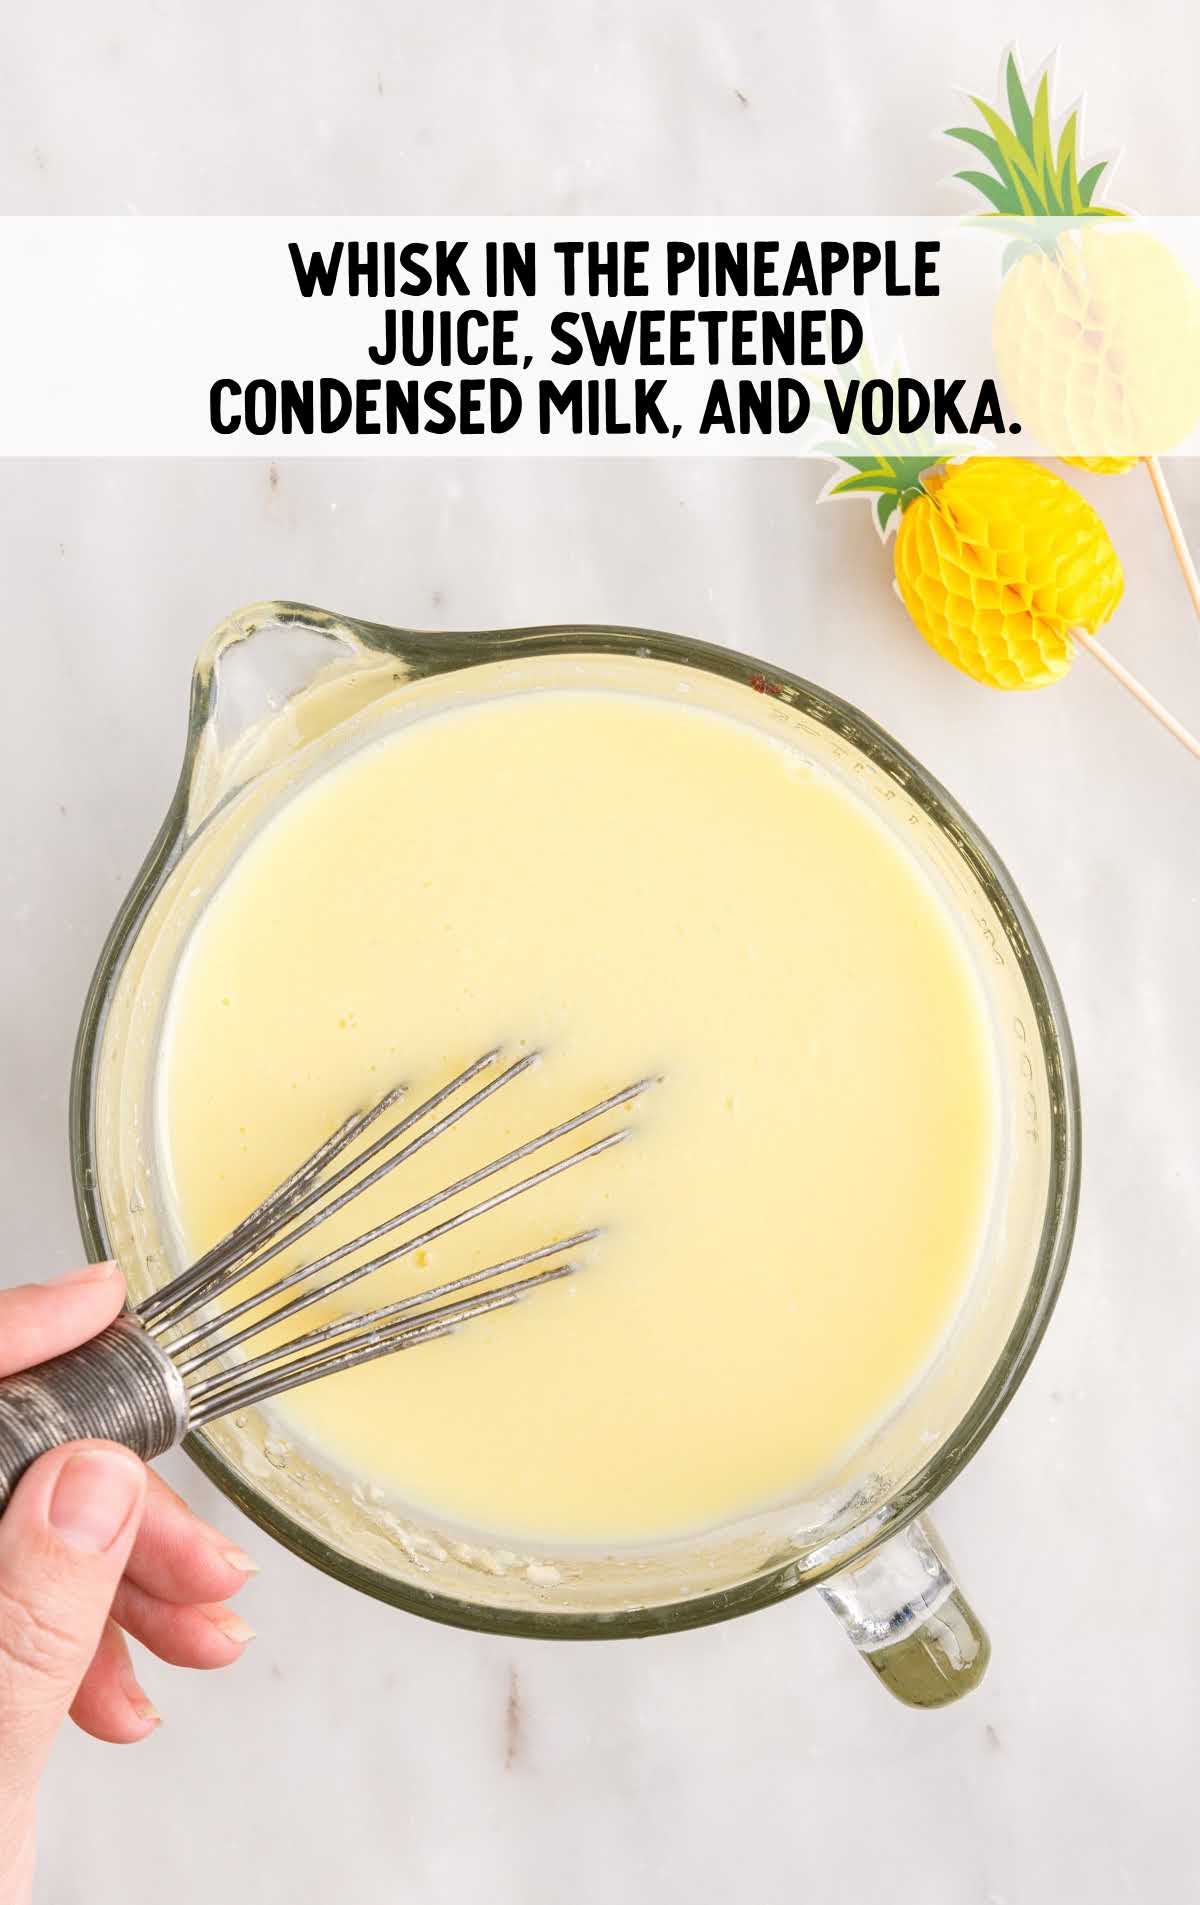 pineapple juice, sweetened condensed milk, and vodka whisked in a measuring cup